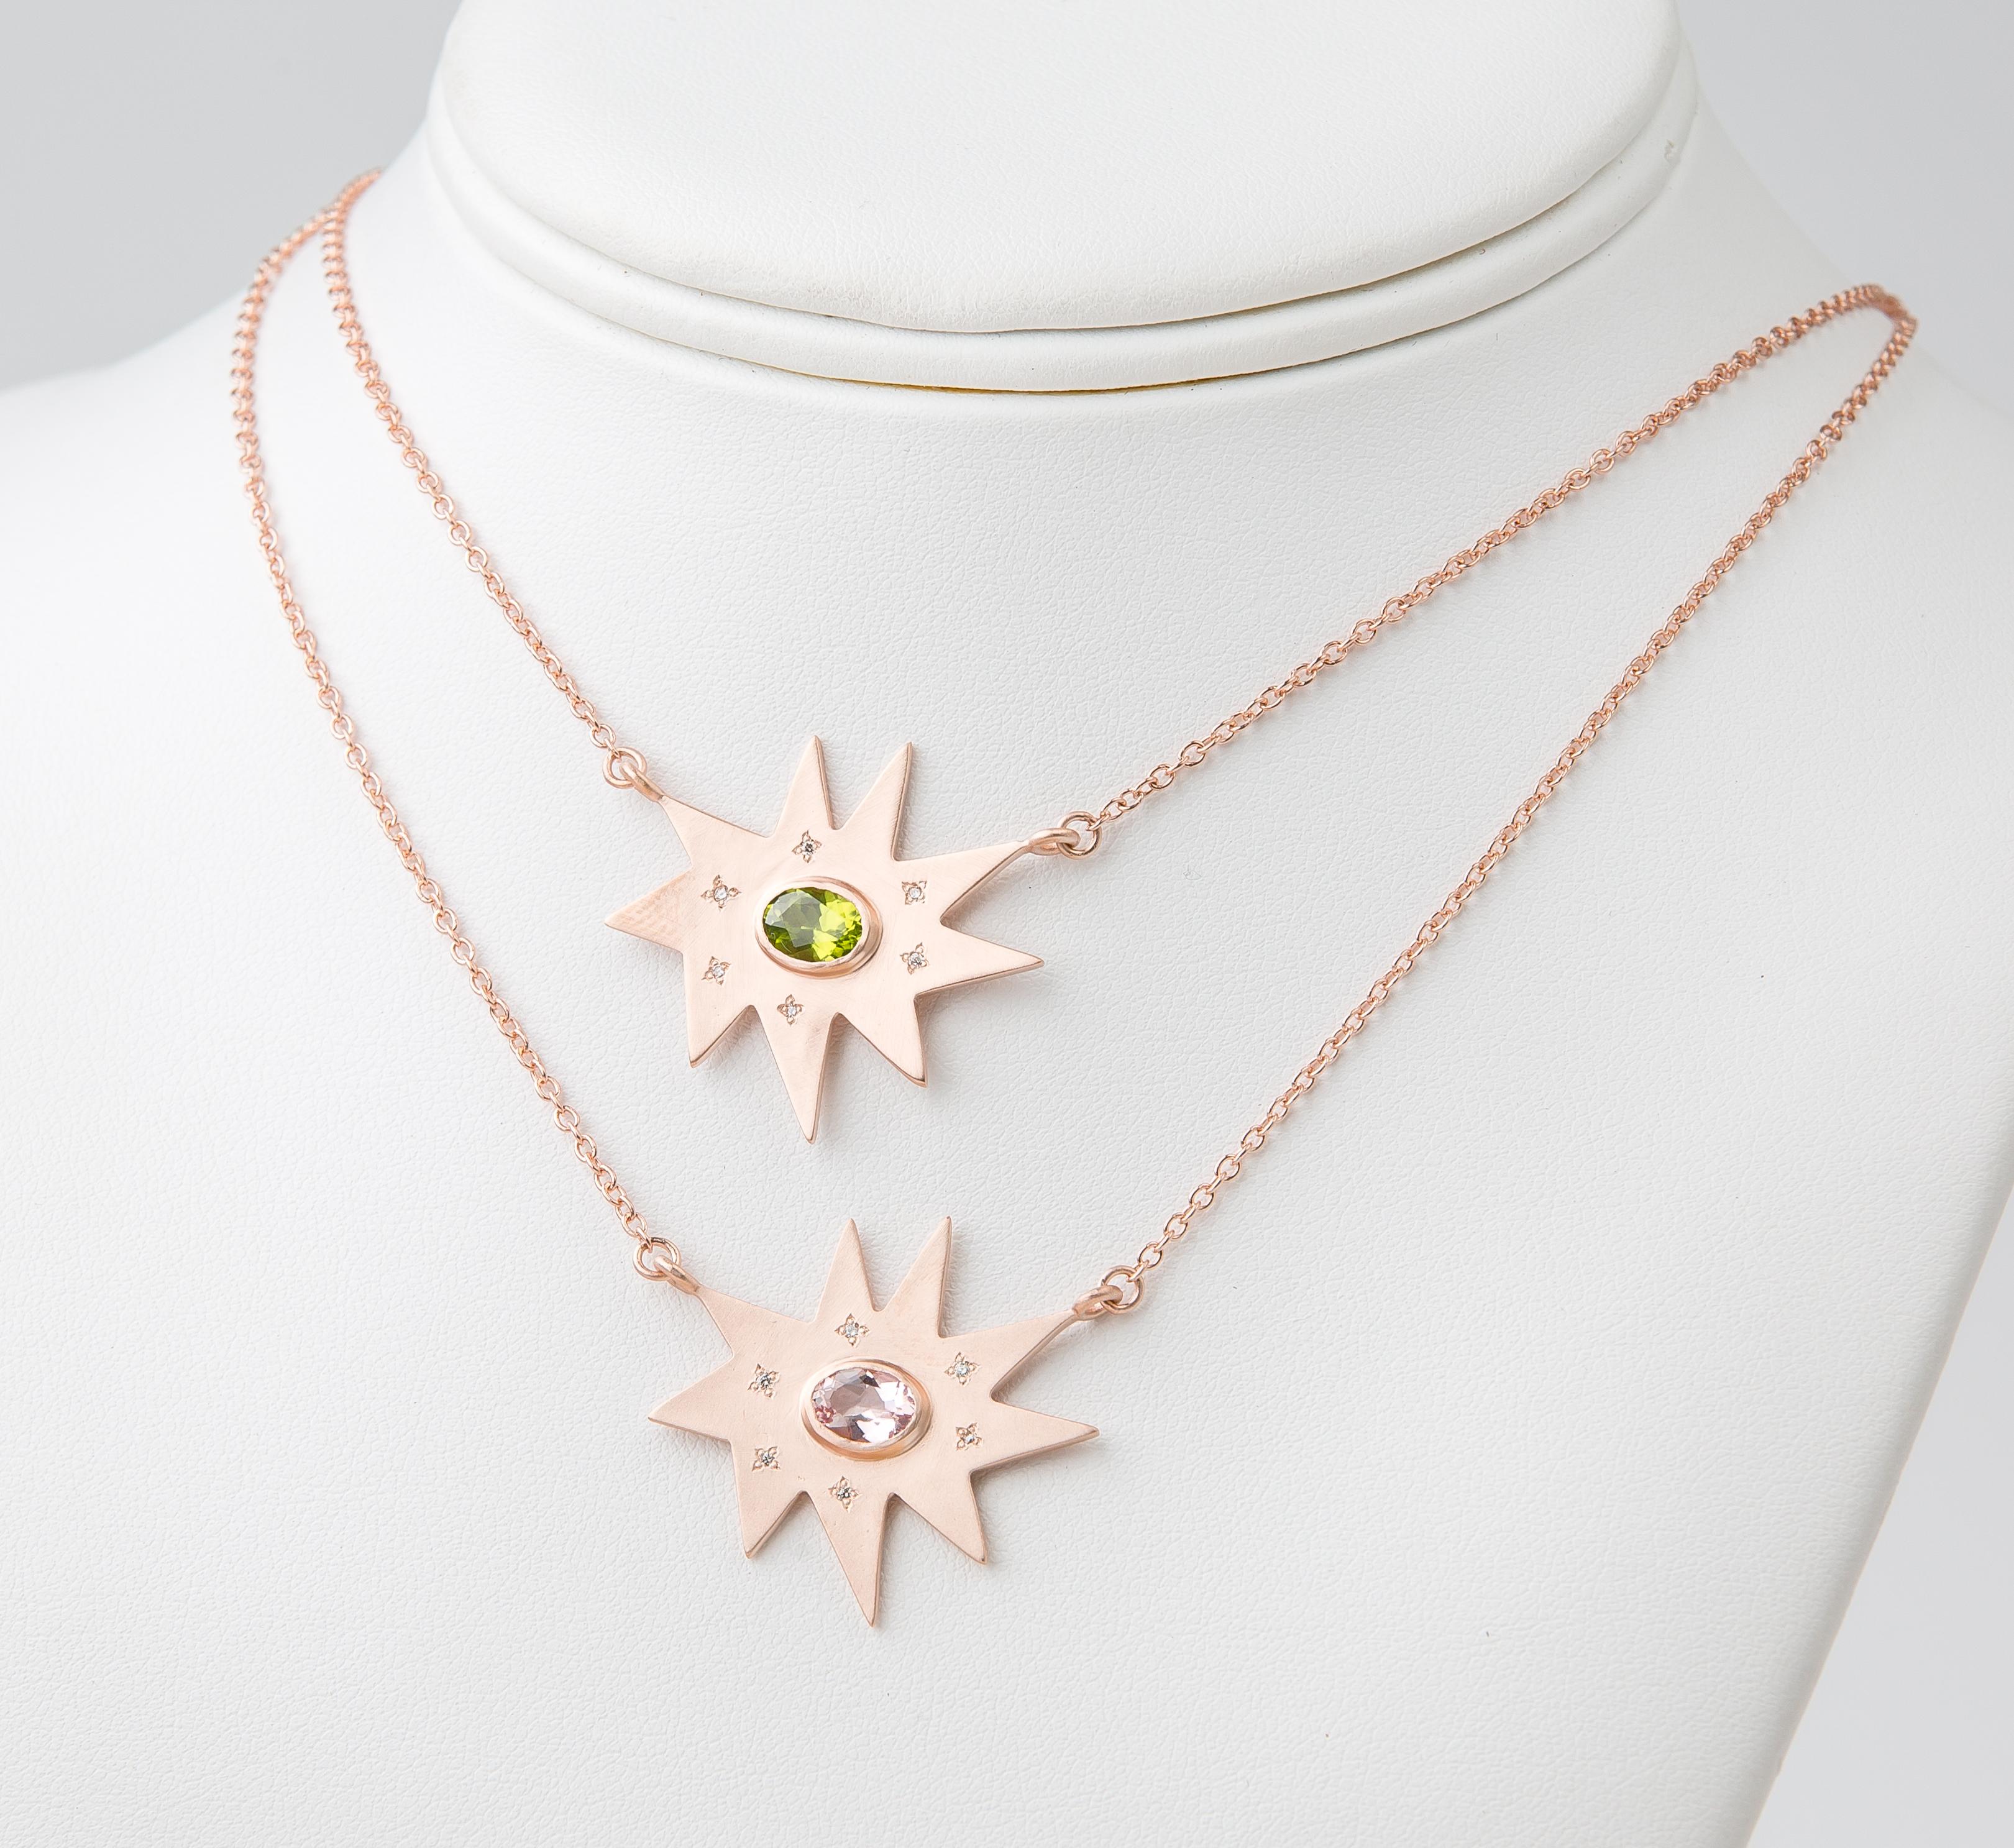 Contemporary Emily Kuvin Rose Gold, Morganite and Diamond Organic Star Shape Pendant Necklace